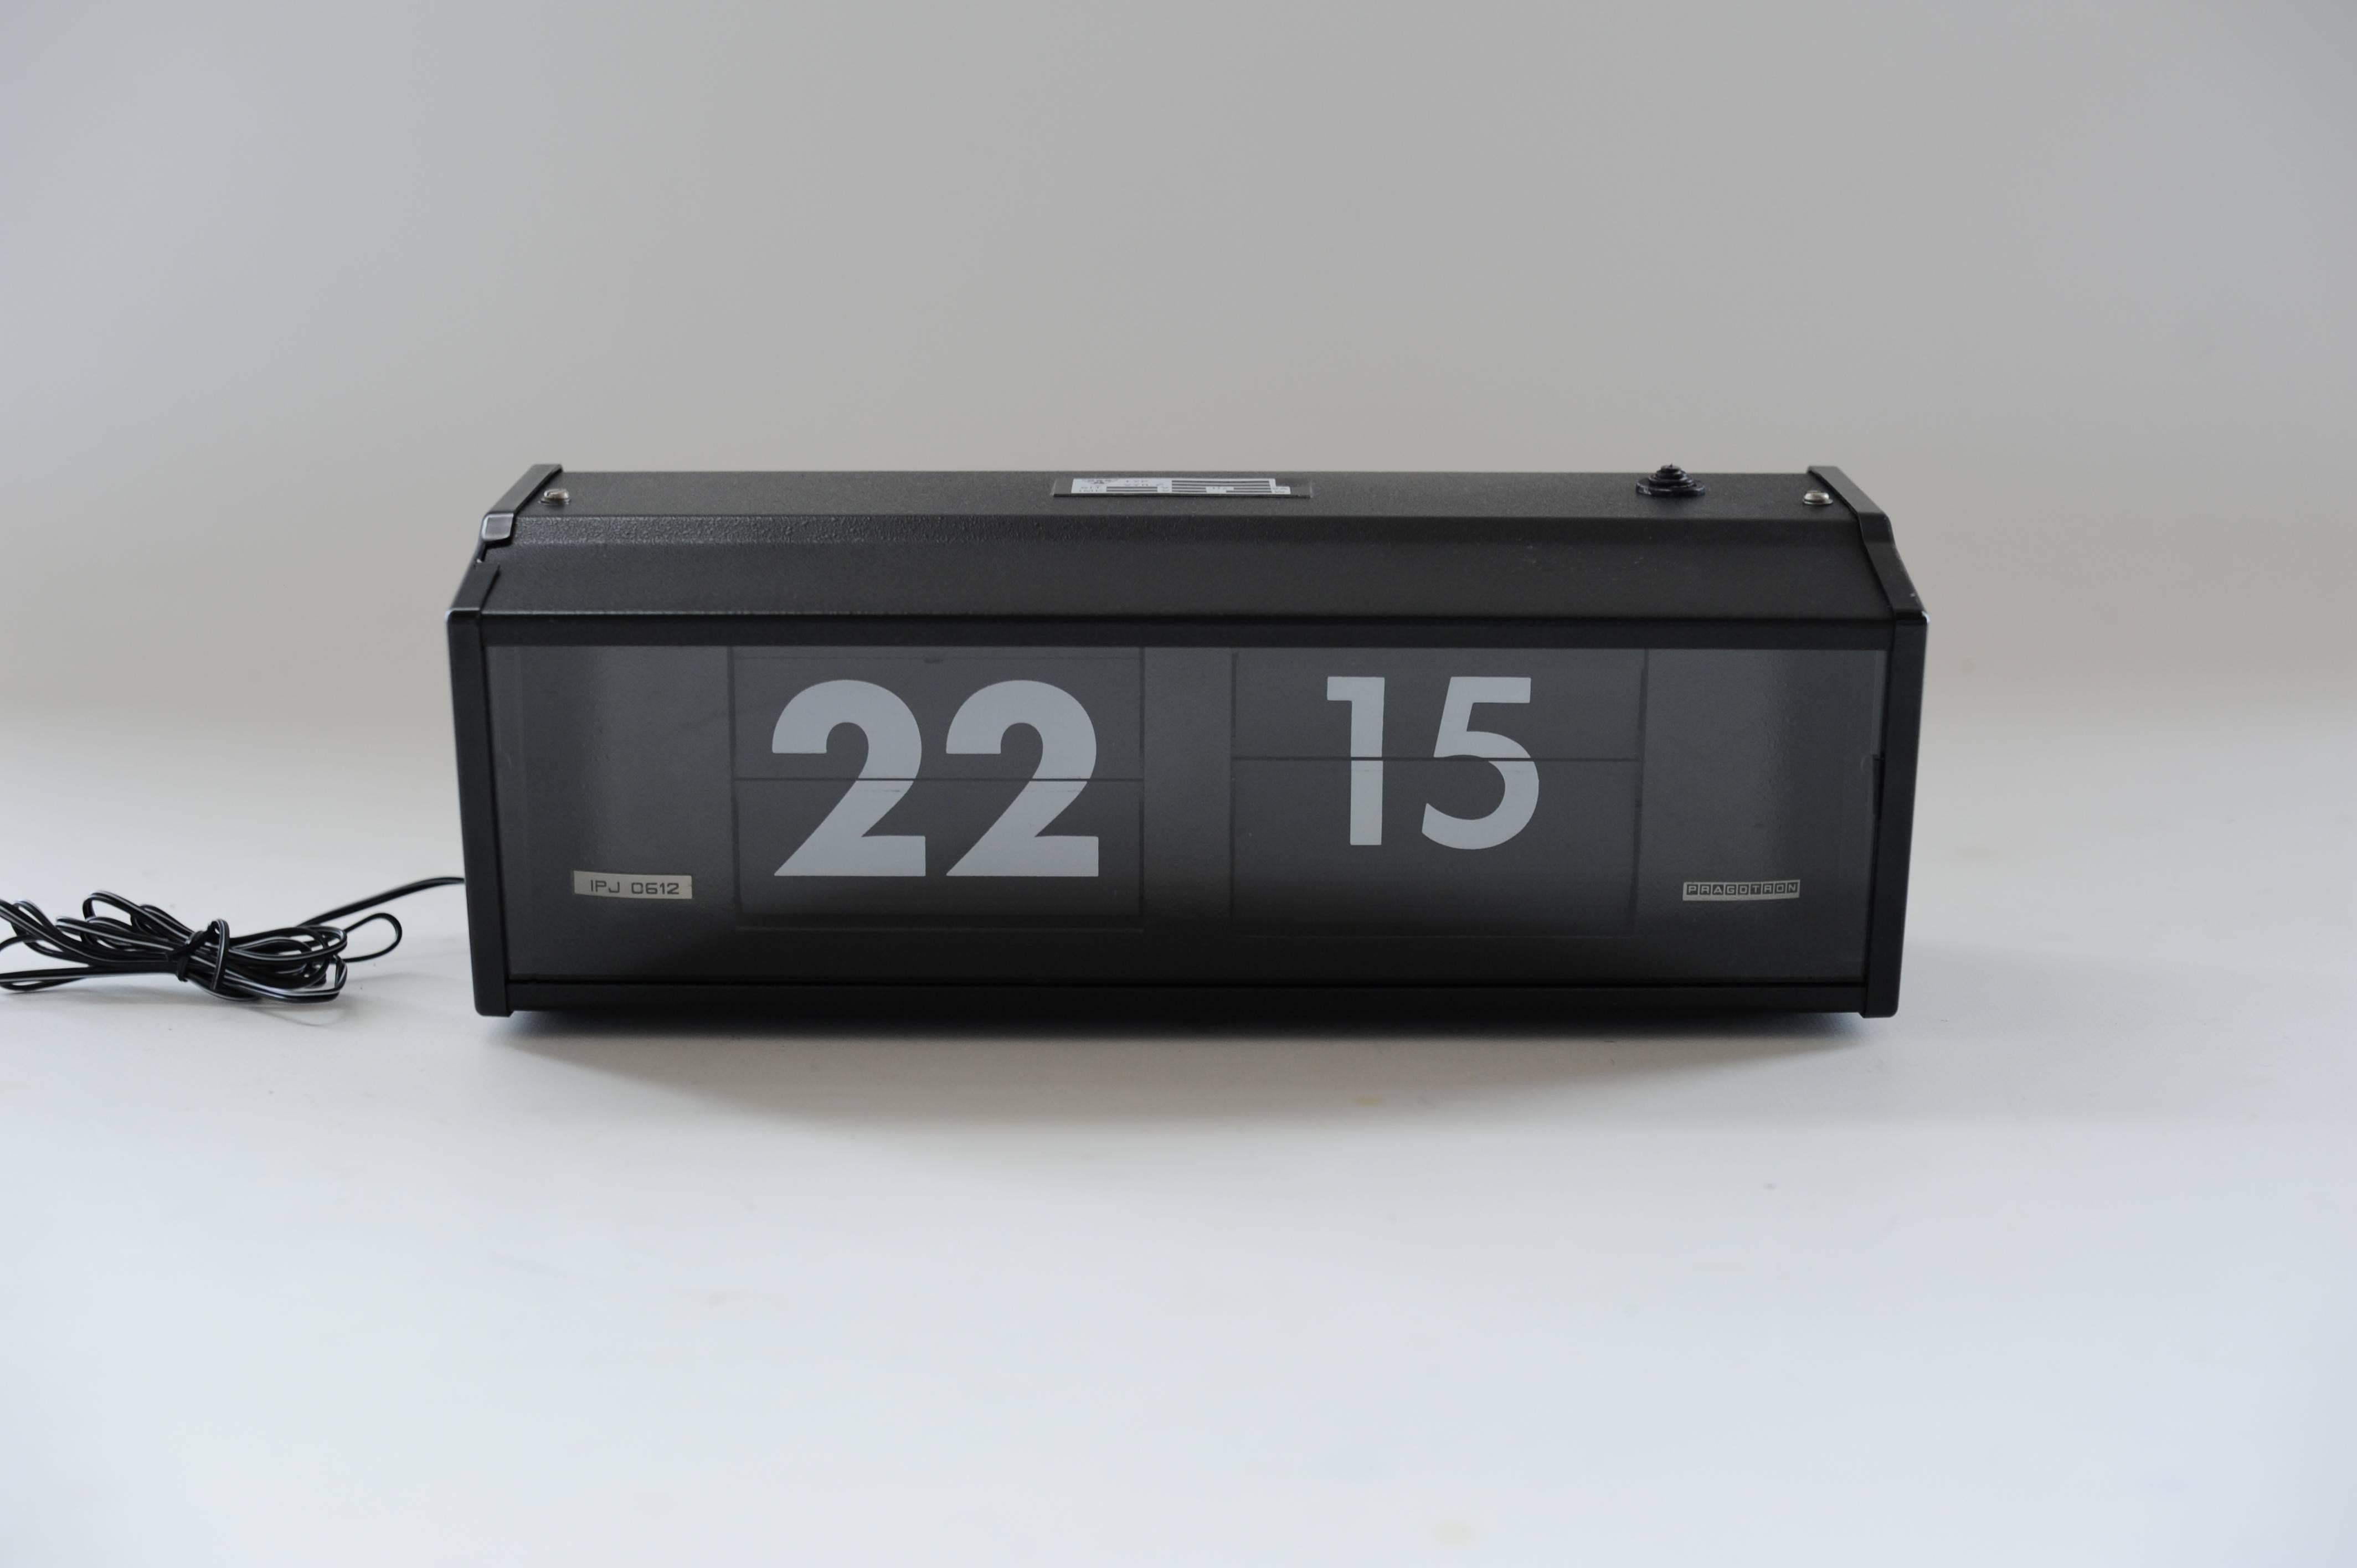 We are offering this nice and decorative electromechanical Pragotron IPJ 0612 Czech loft wall flip clock from the 1960s- 1970s.
Designed and made in Czechoslovakia.
Converted to operate as an independent wall clock with cable for a plug and play